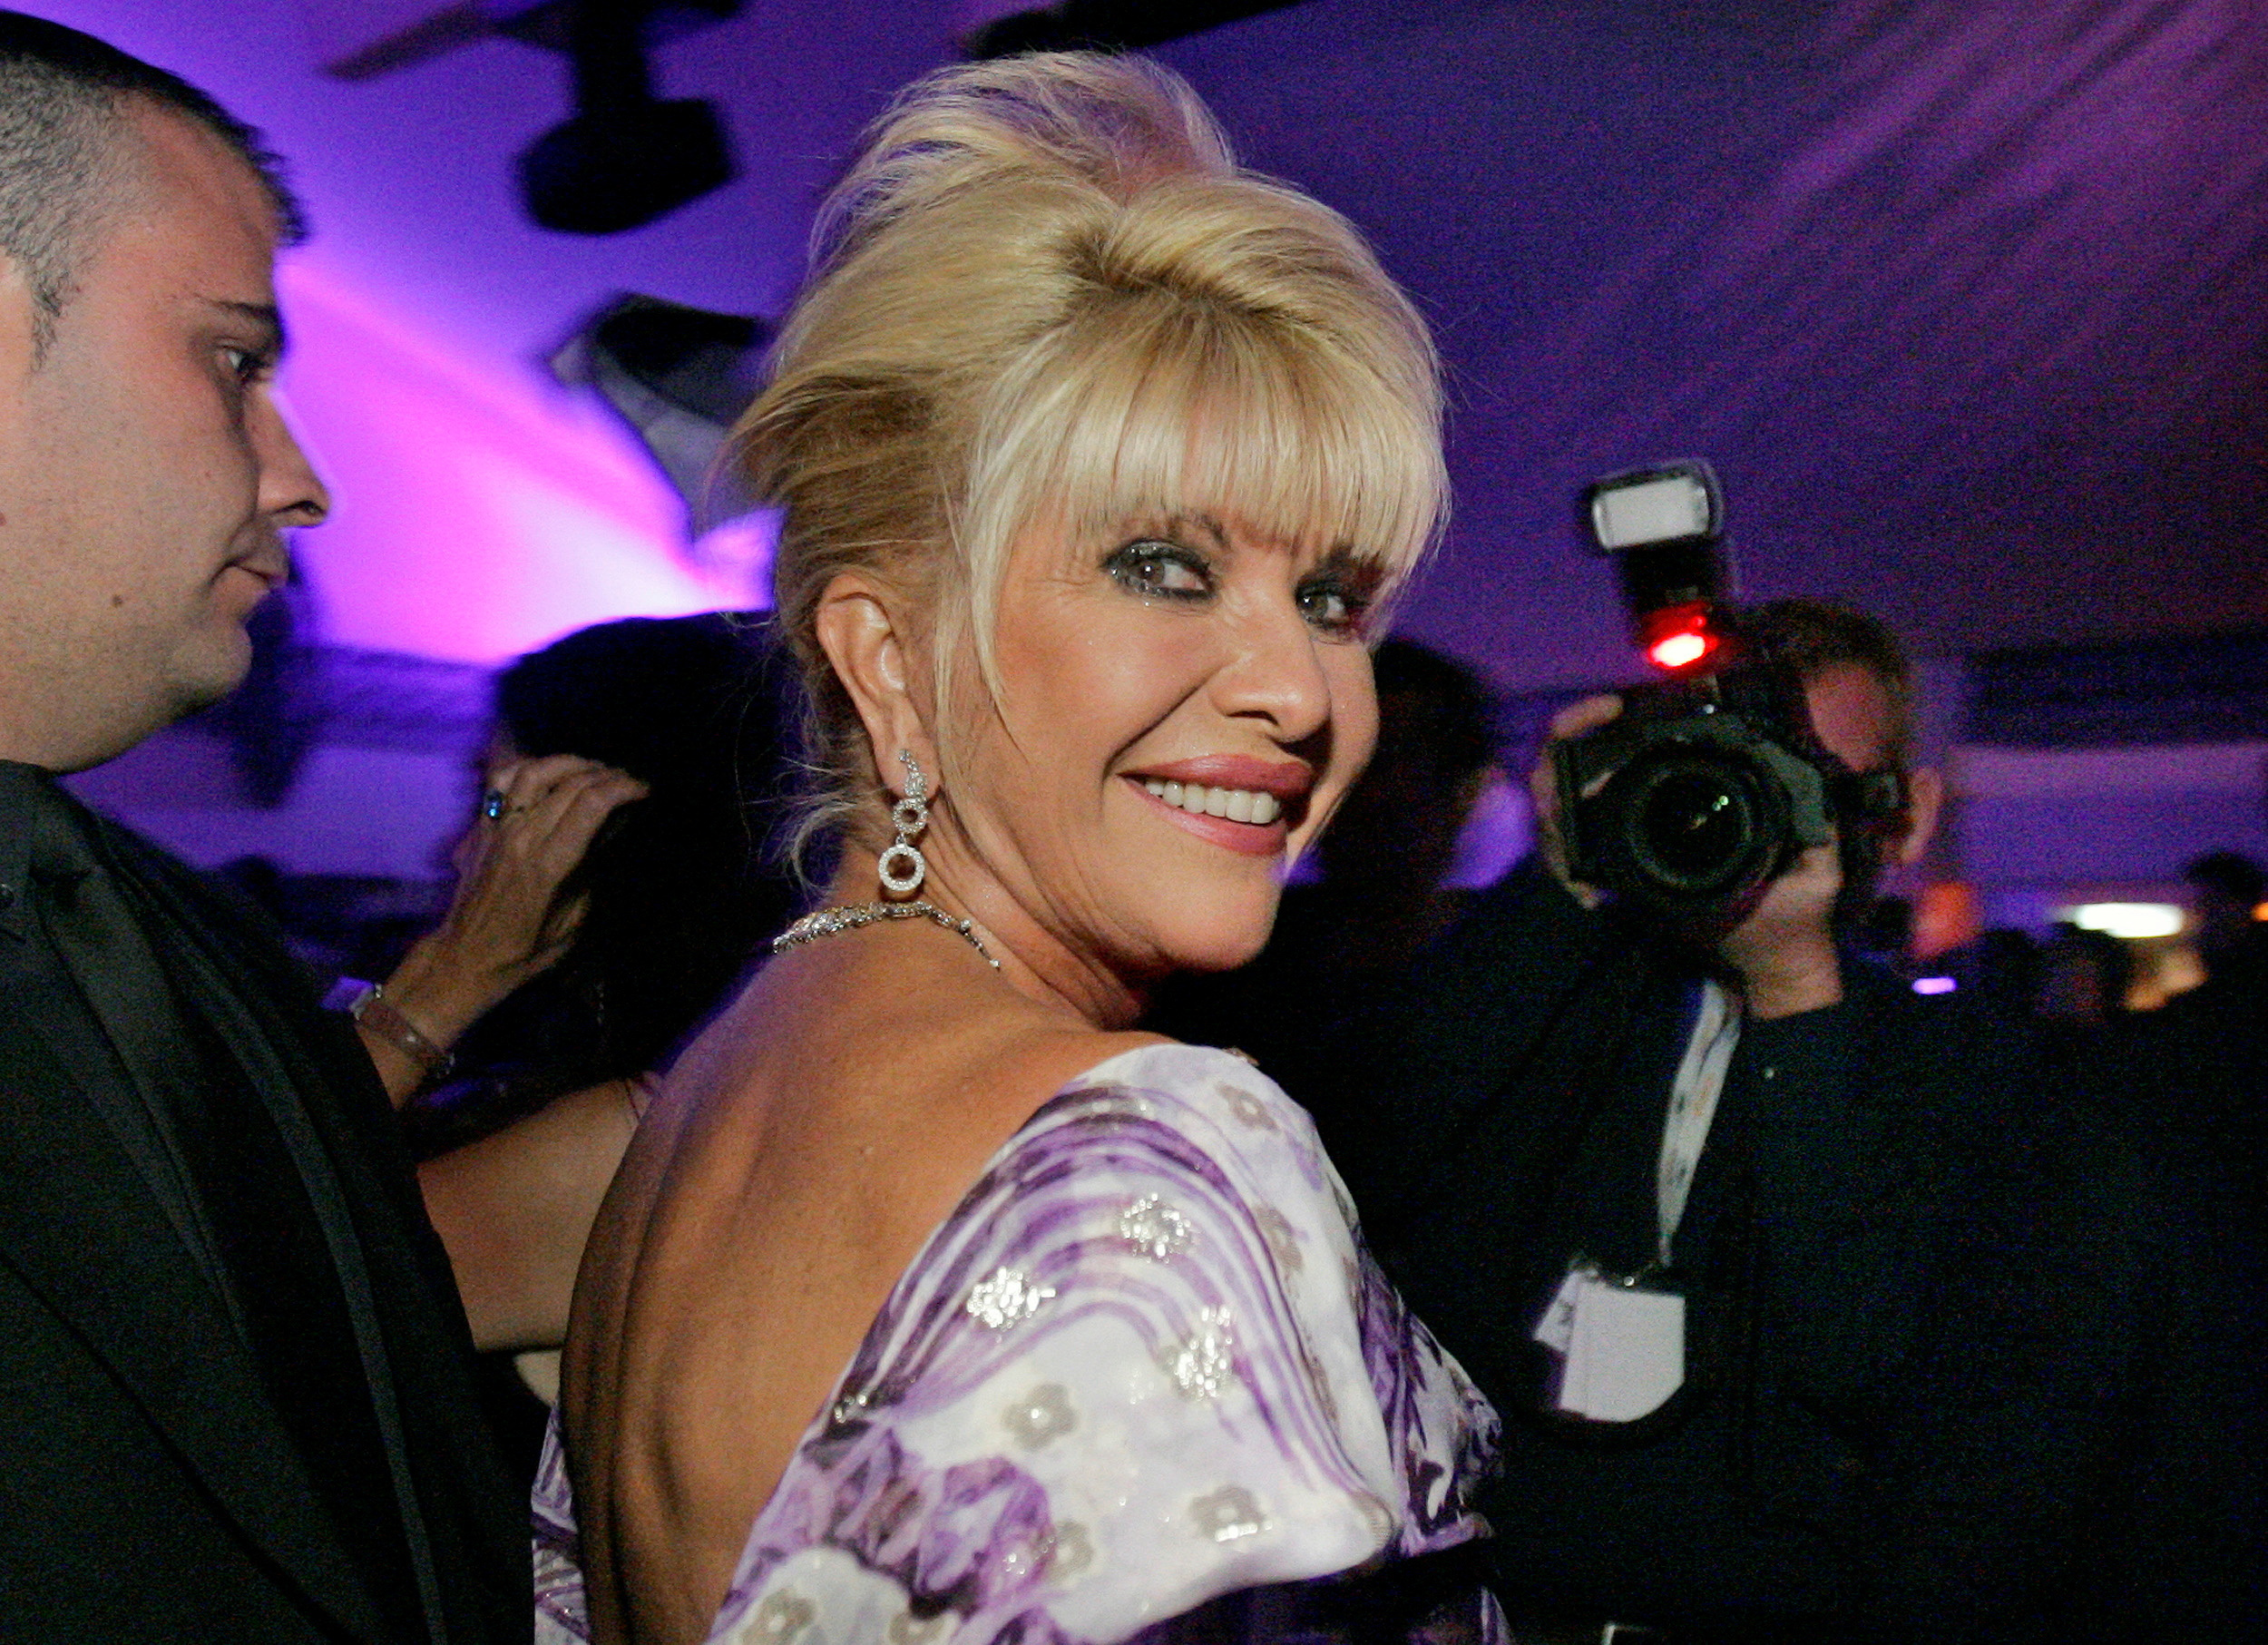 File photo: Ivana Trump in Cannes on May 24, 2006 (REUTERS/Mario Anzuoni)